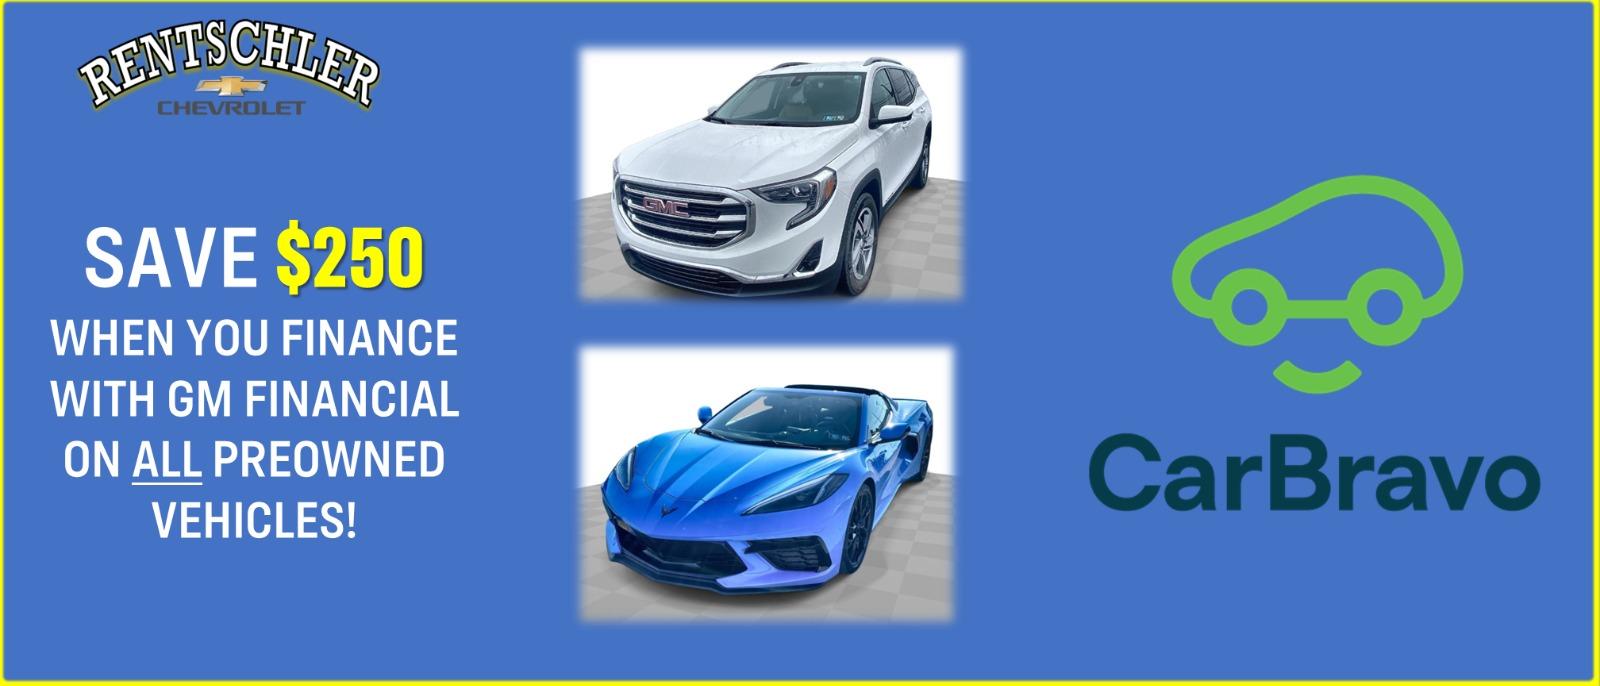 Certified Preowned Vehicles